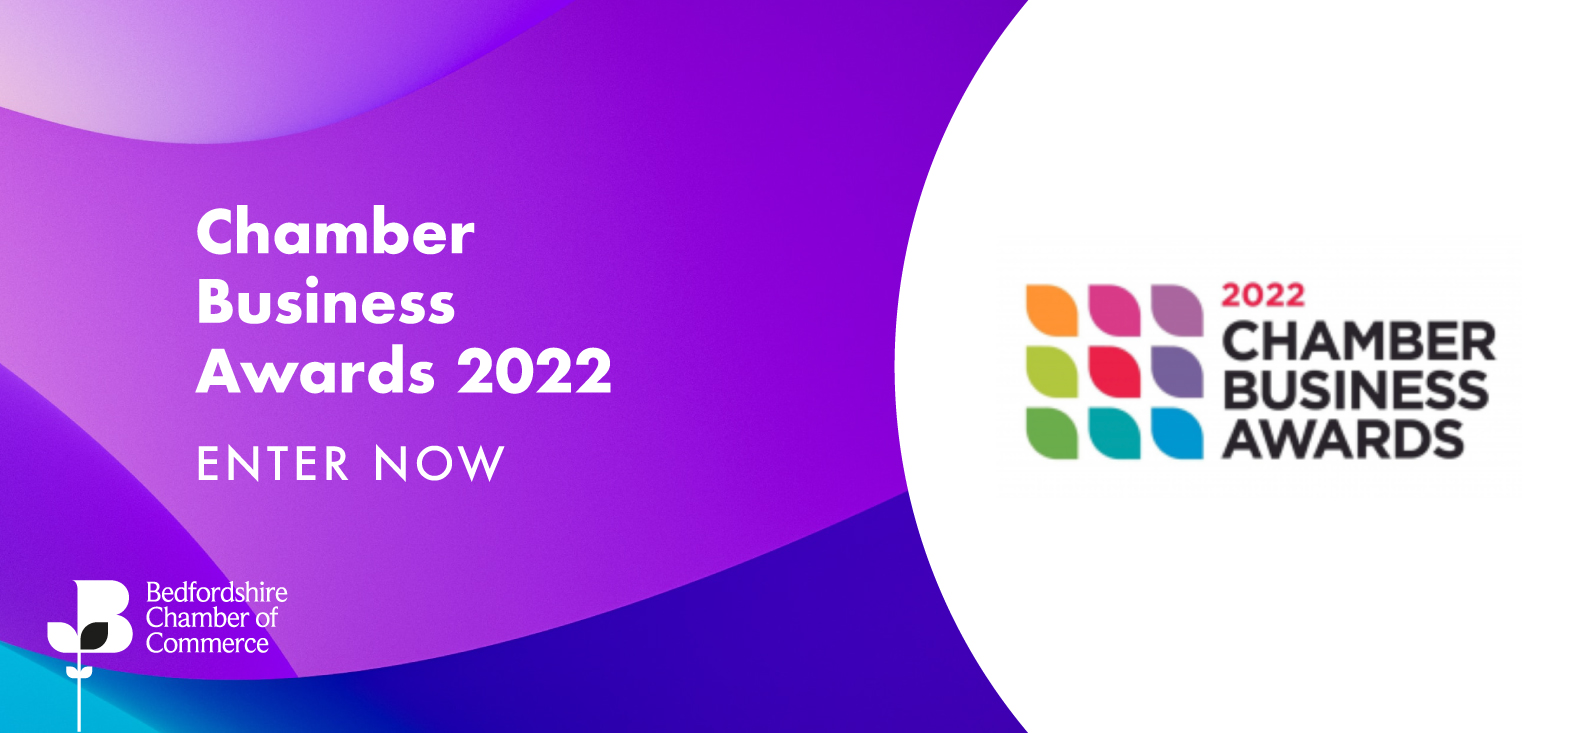 The Chamber Business Awards 2022 - Enter Now!